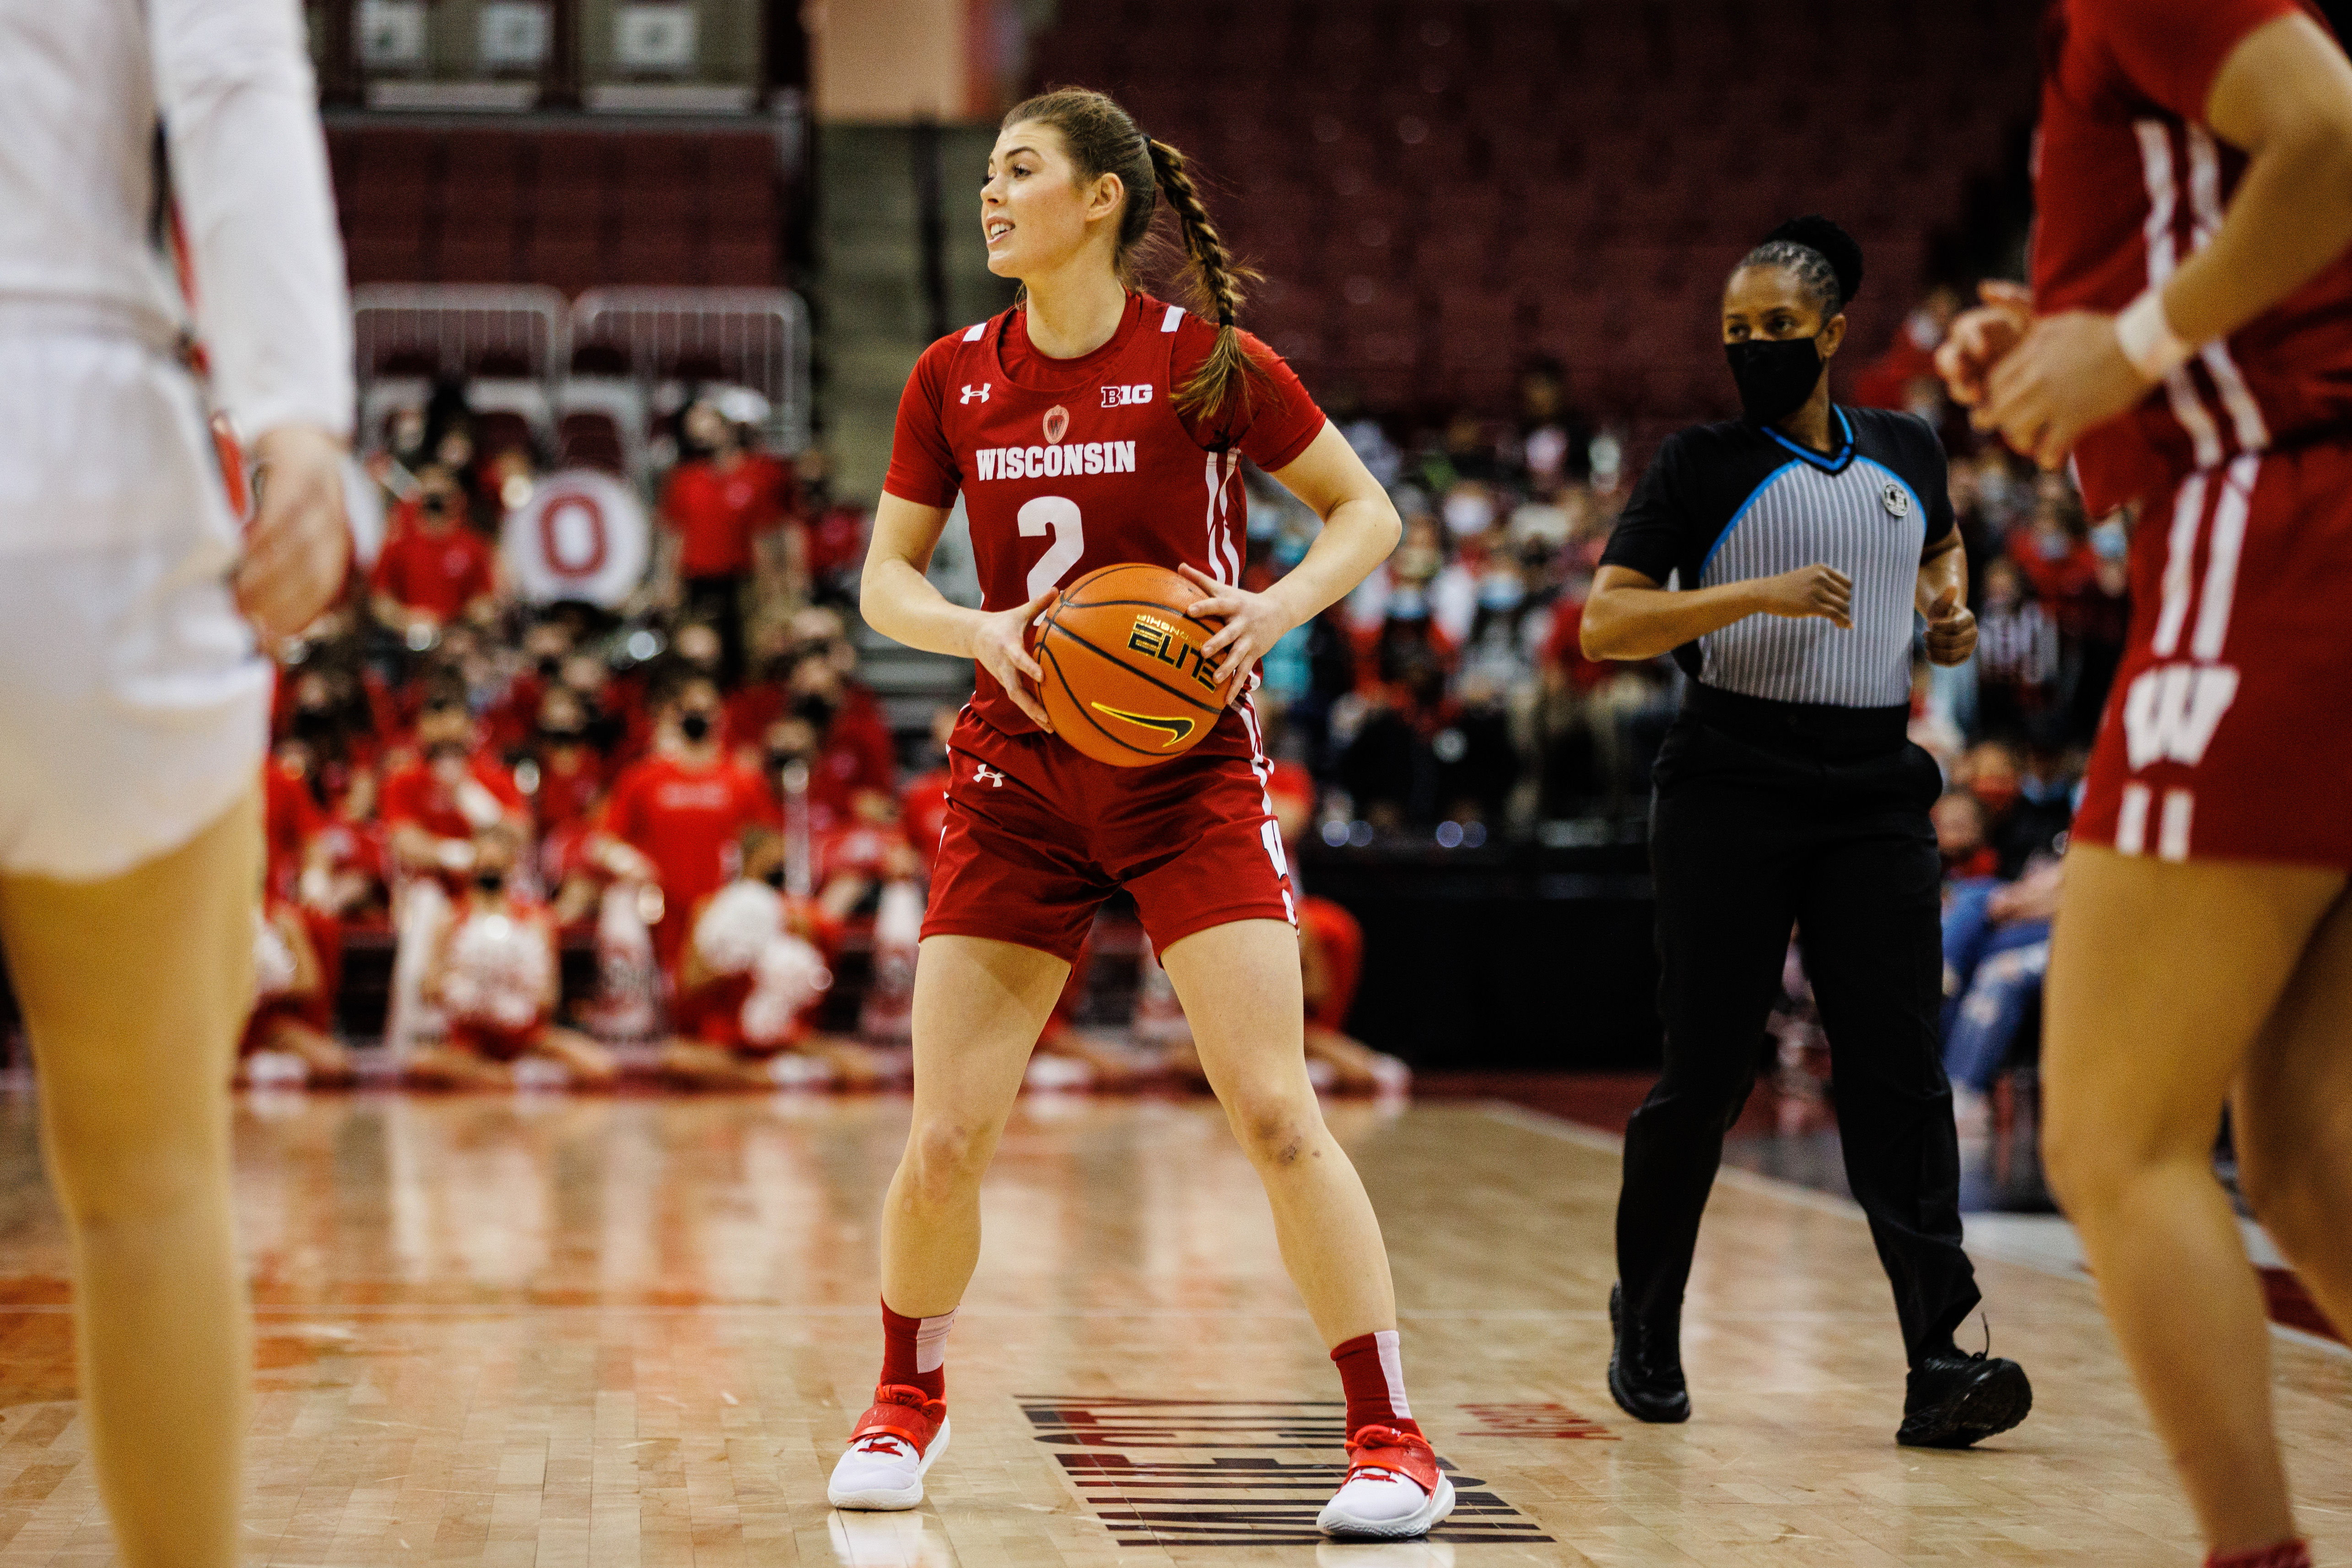 COLLEGE BASKETBALL: FEB 20 Womens - Wisconsin at Ohio State